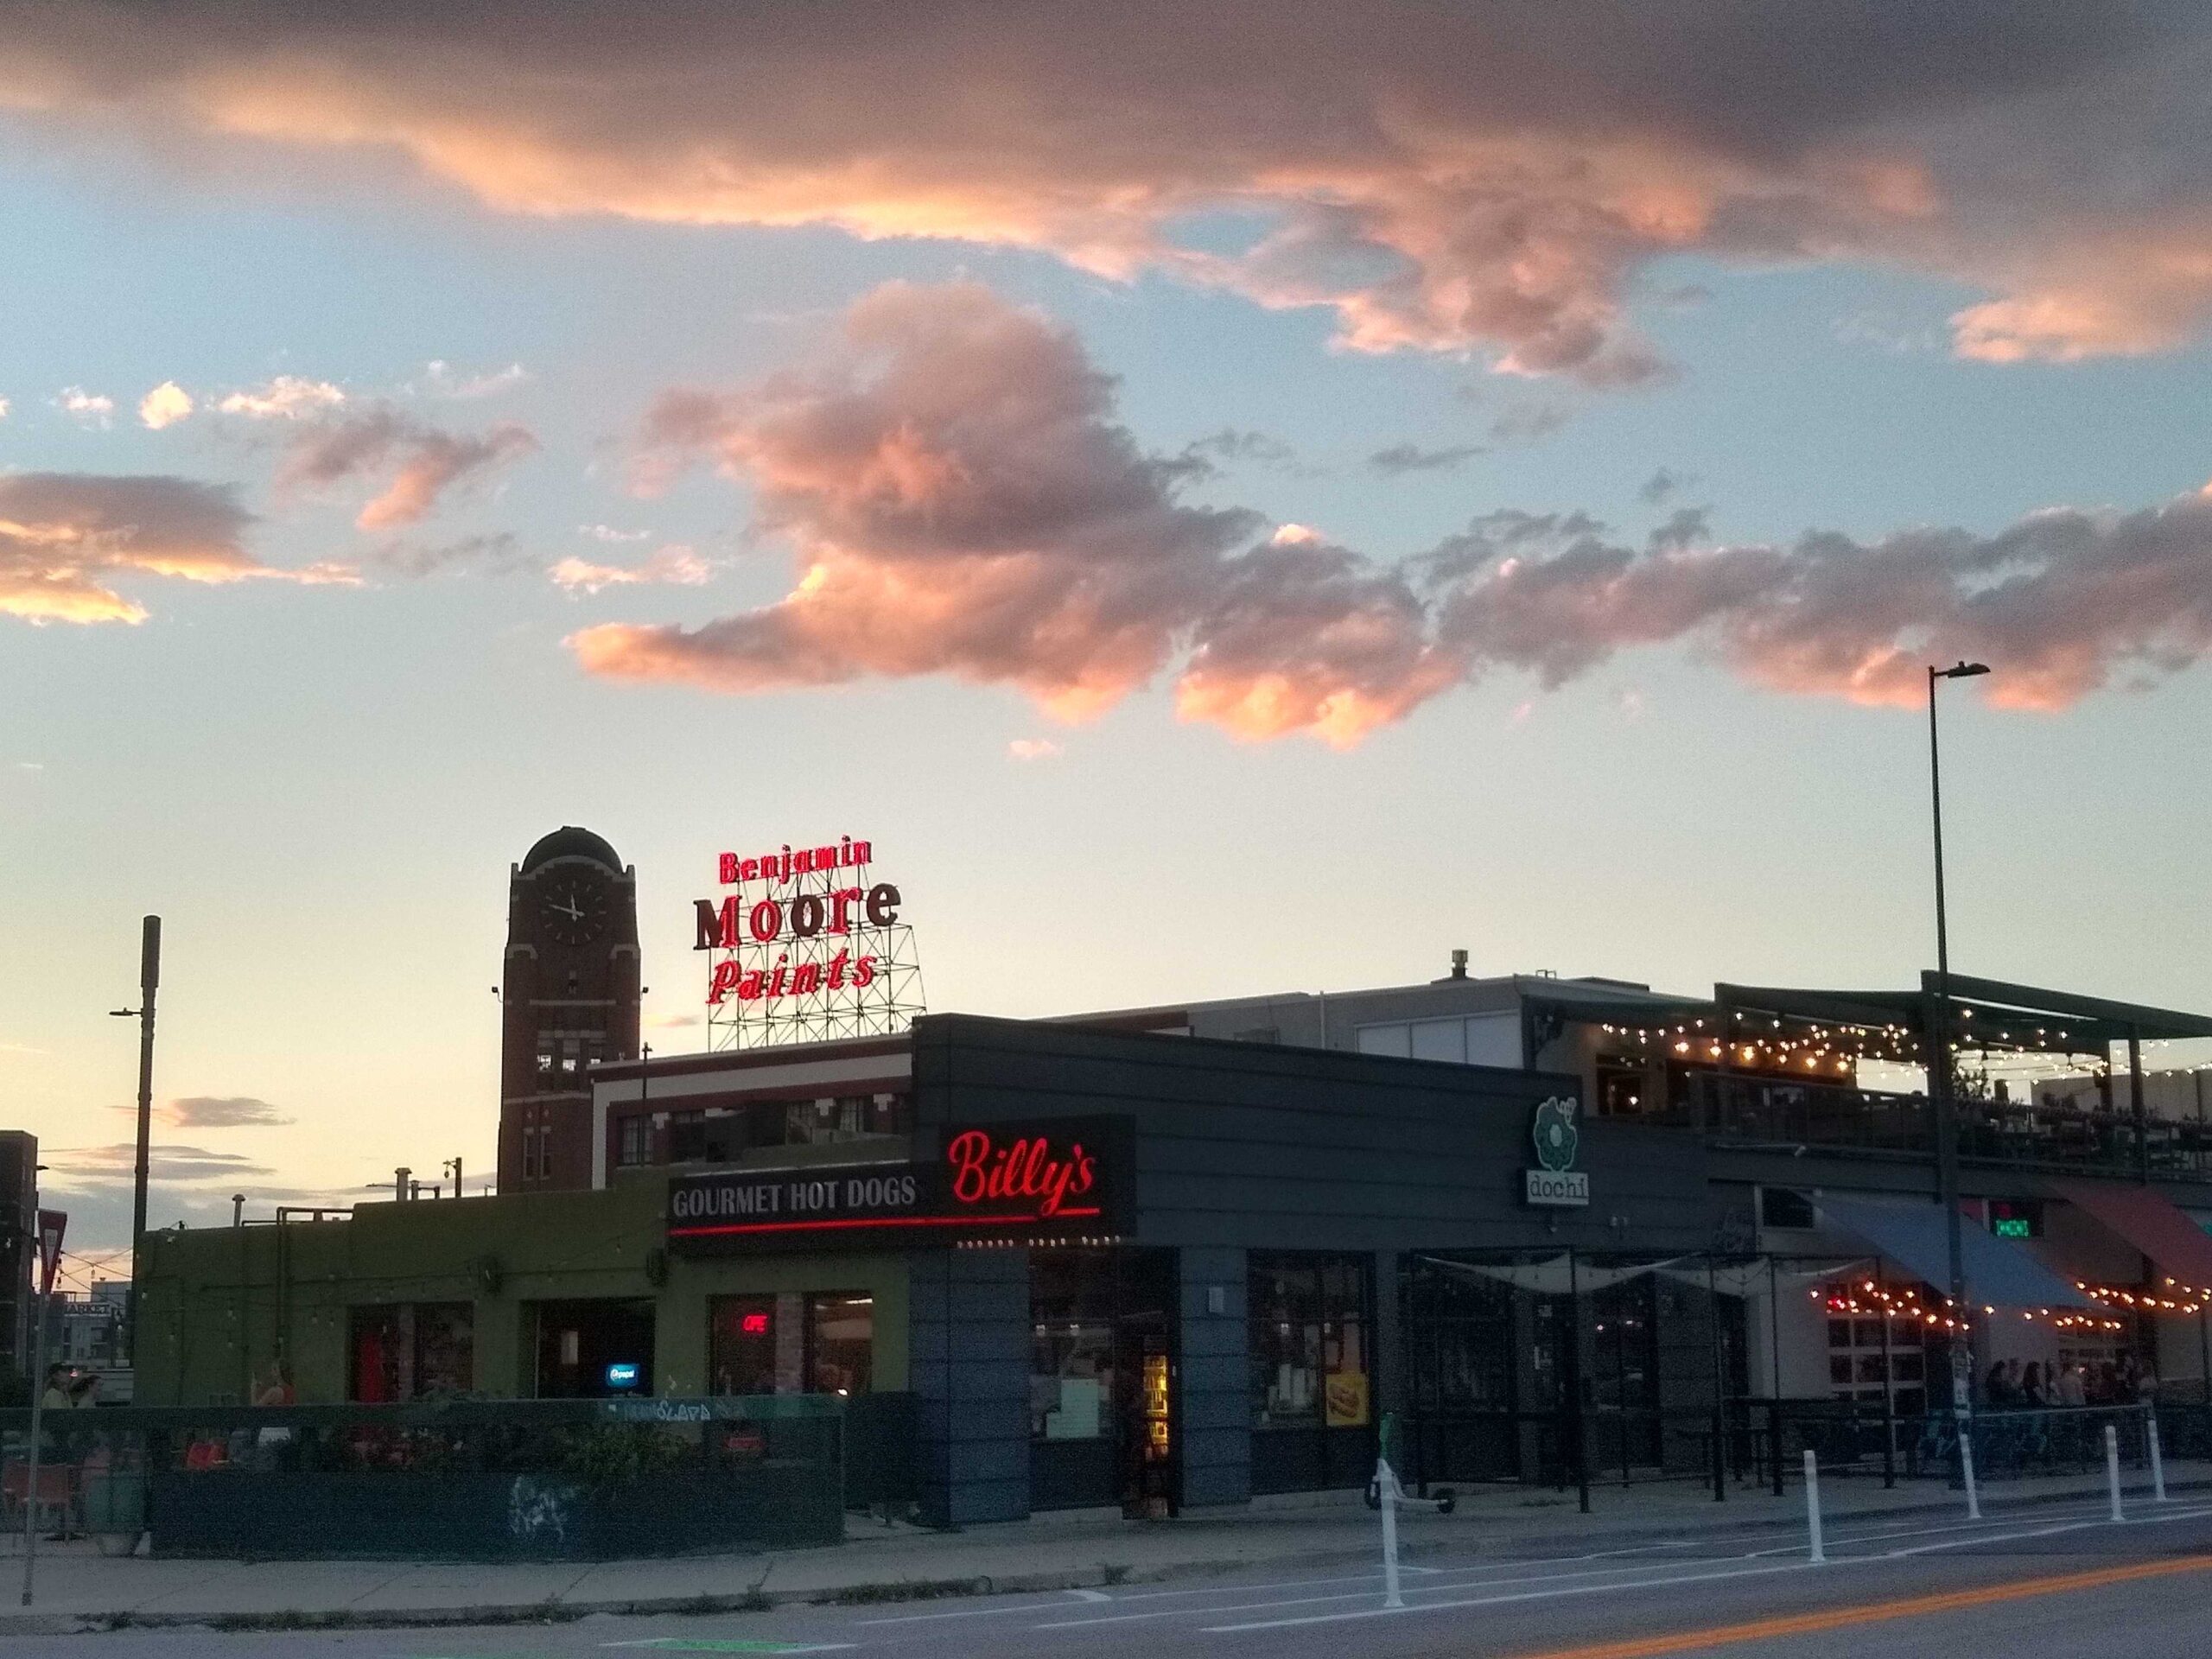 neon Benjamin Moores Paints sign in Denver at sunset